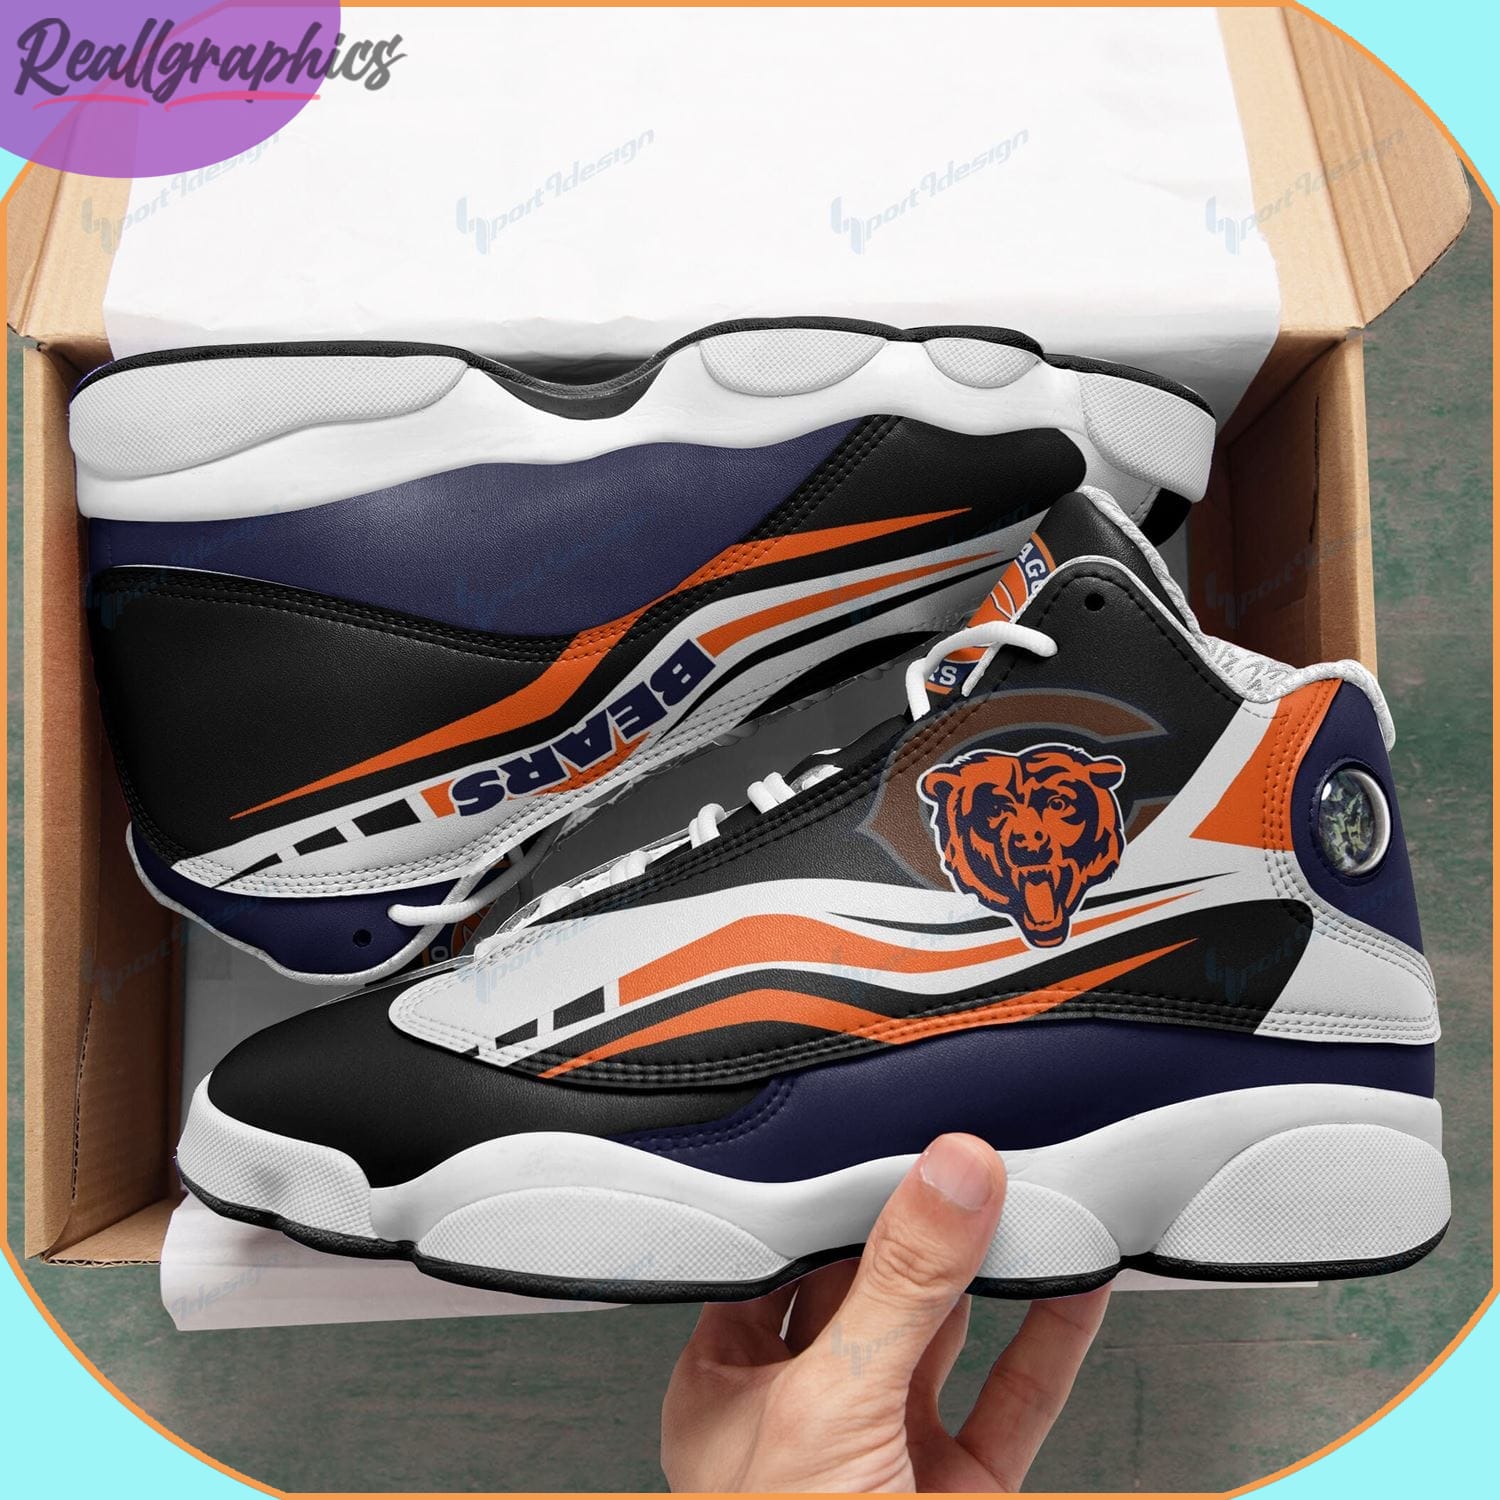 Chicago Bears jordans 13 limited edition 